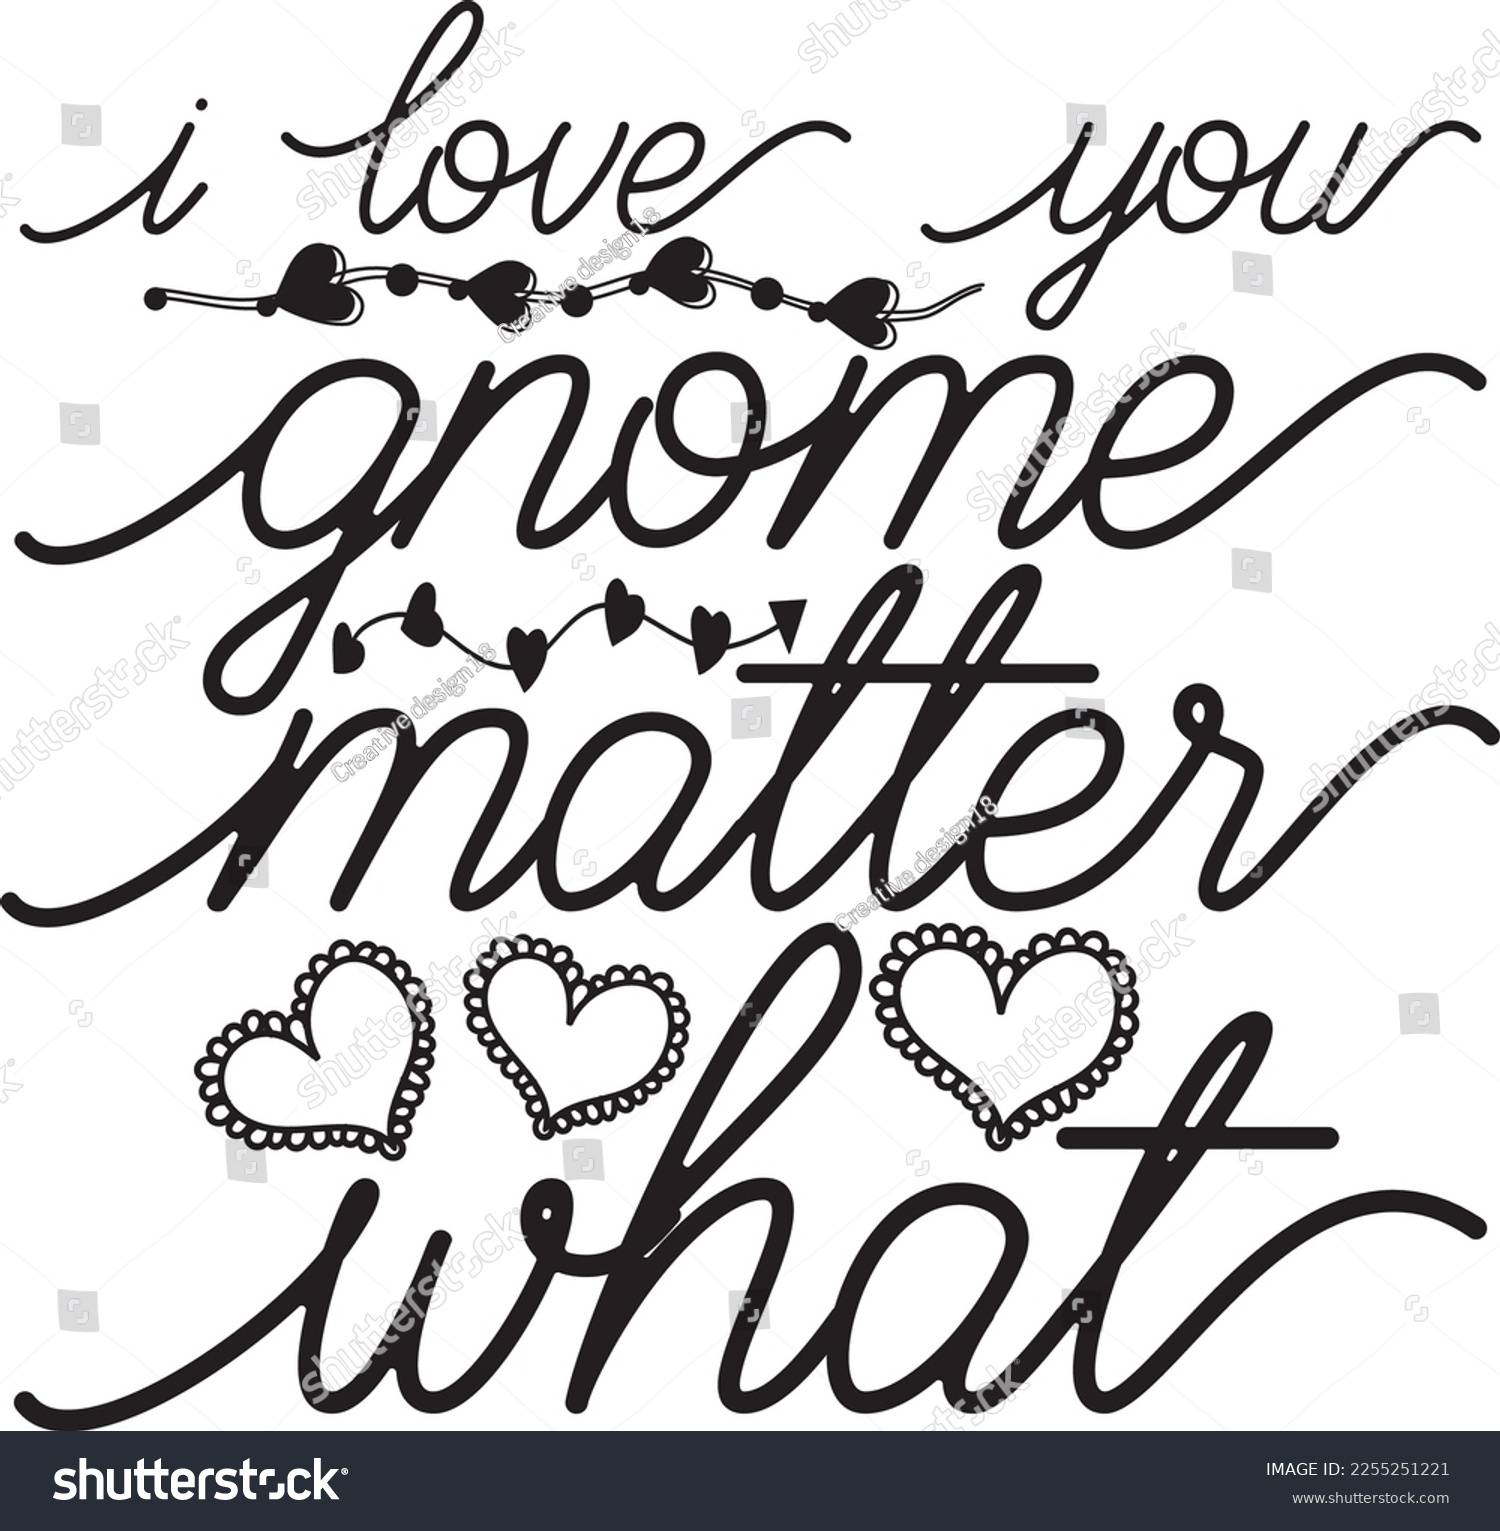 SVG of 
I love you gnome matter what svg